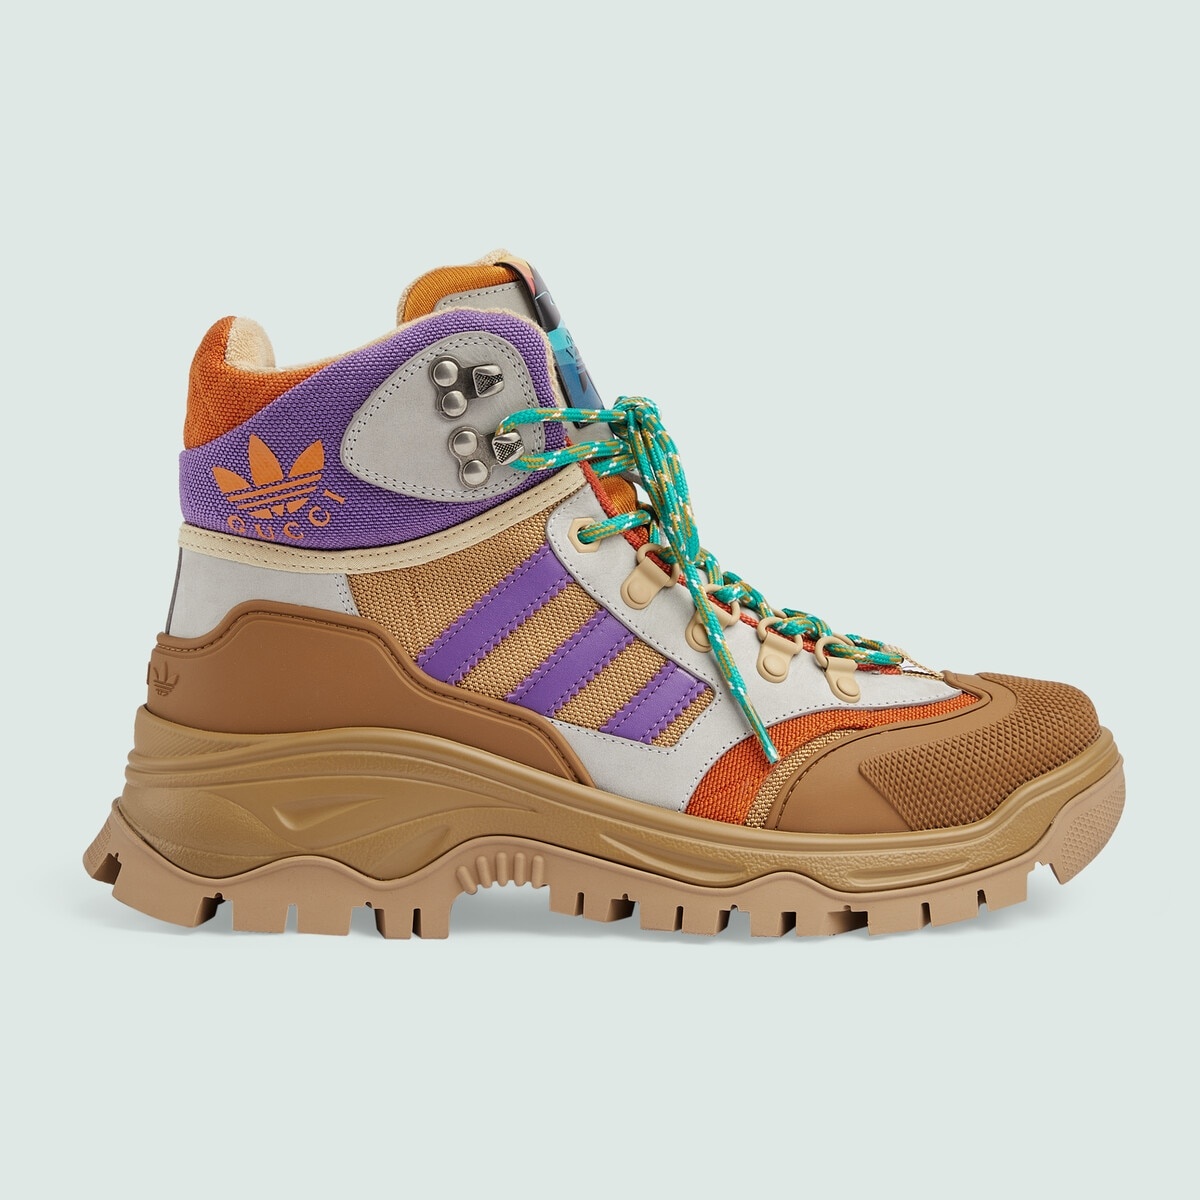 adidas x Gucci women's lace up boot - 1